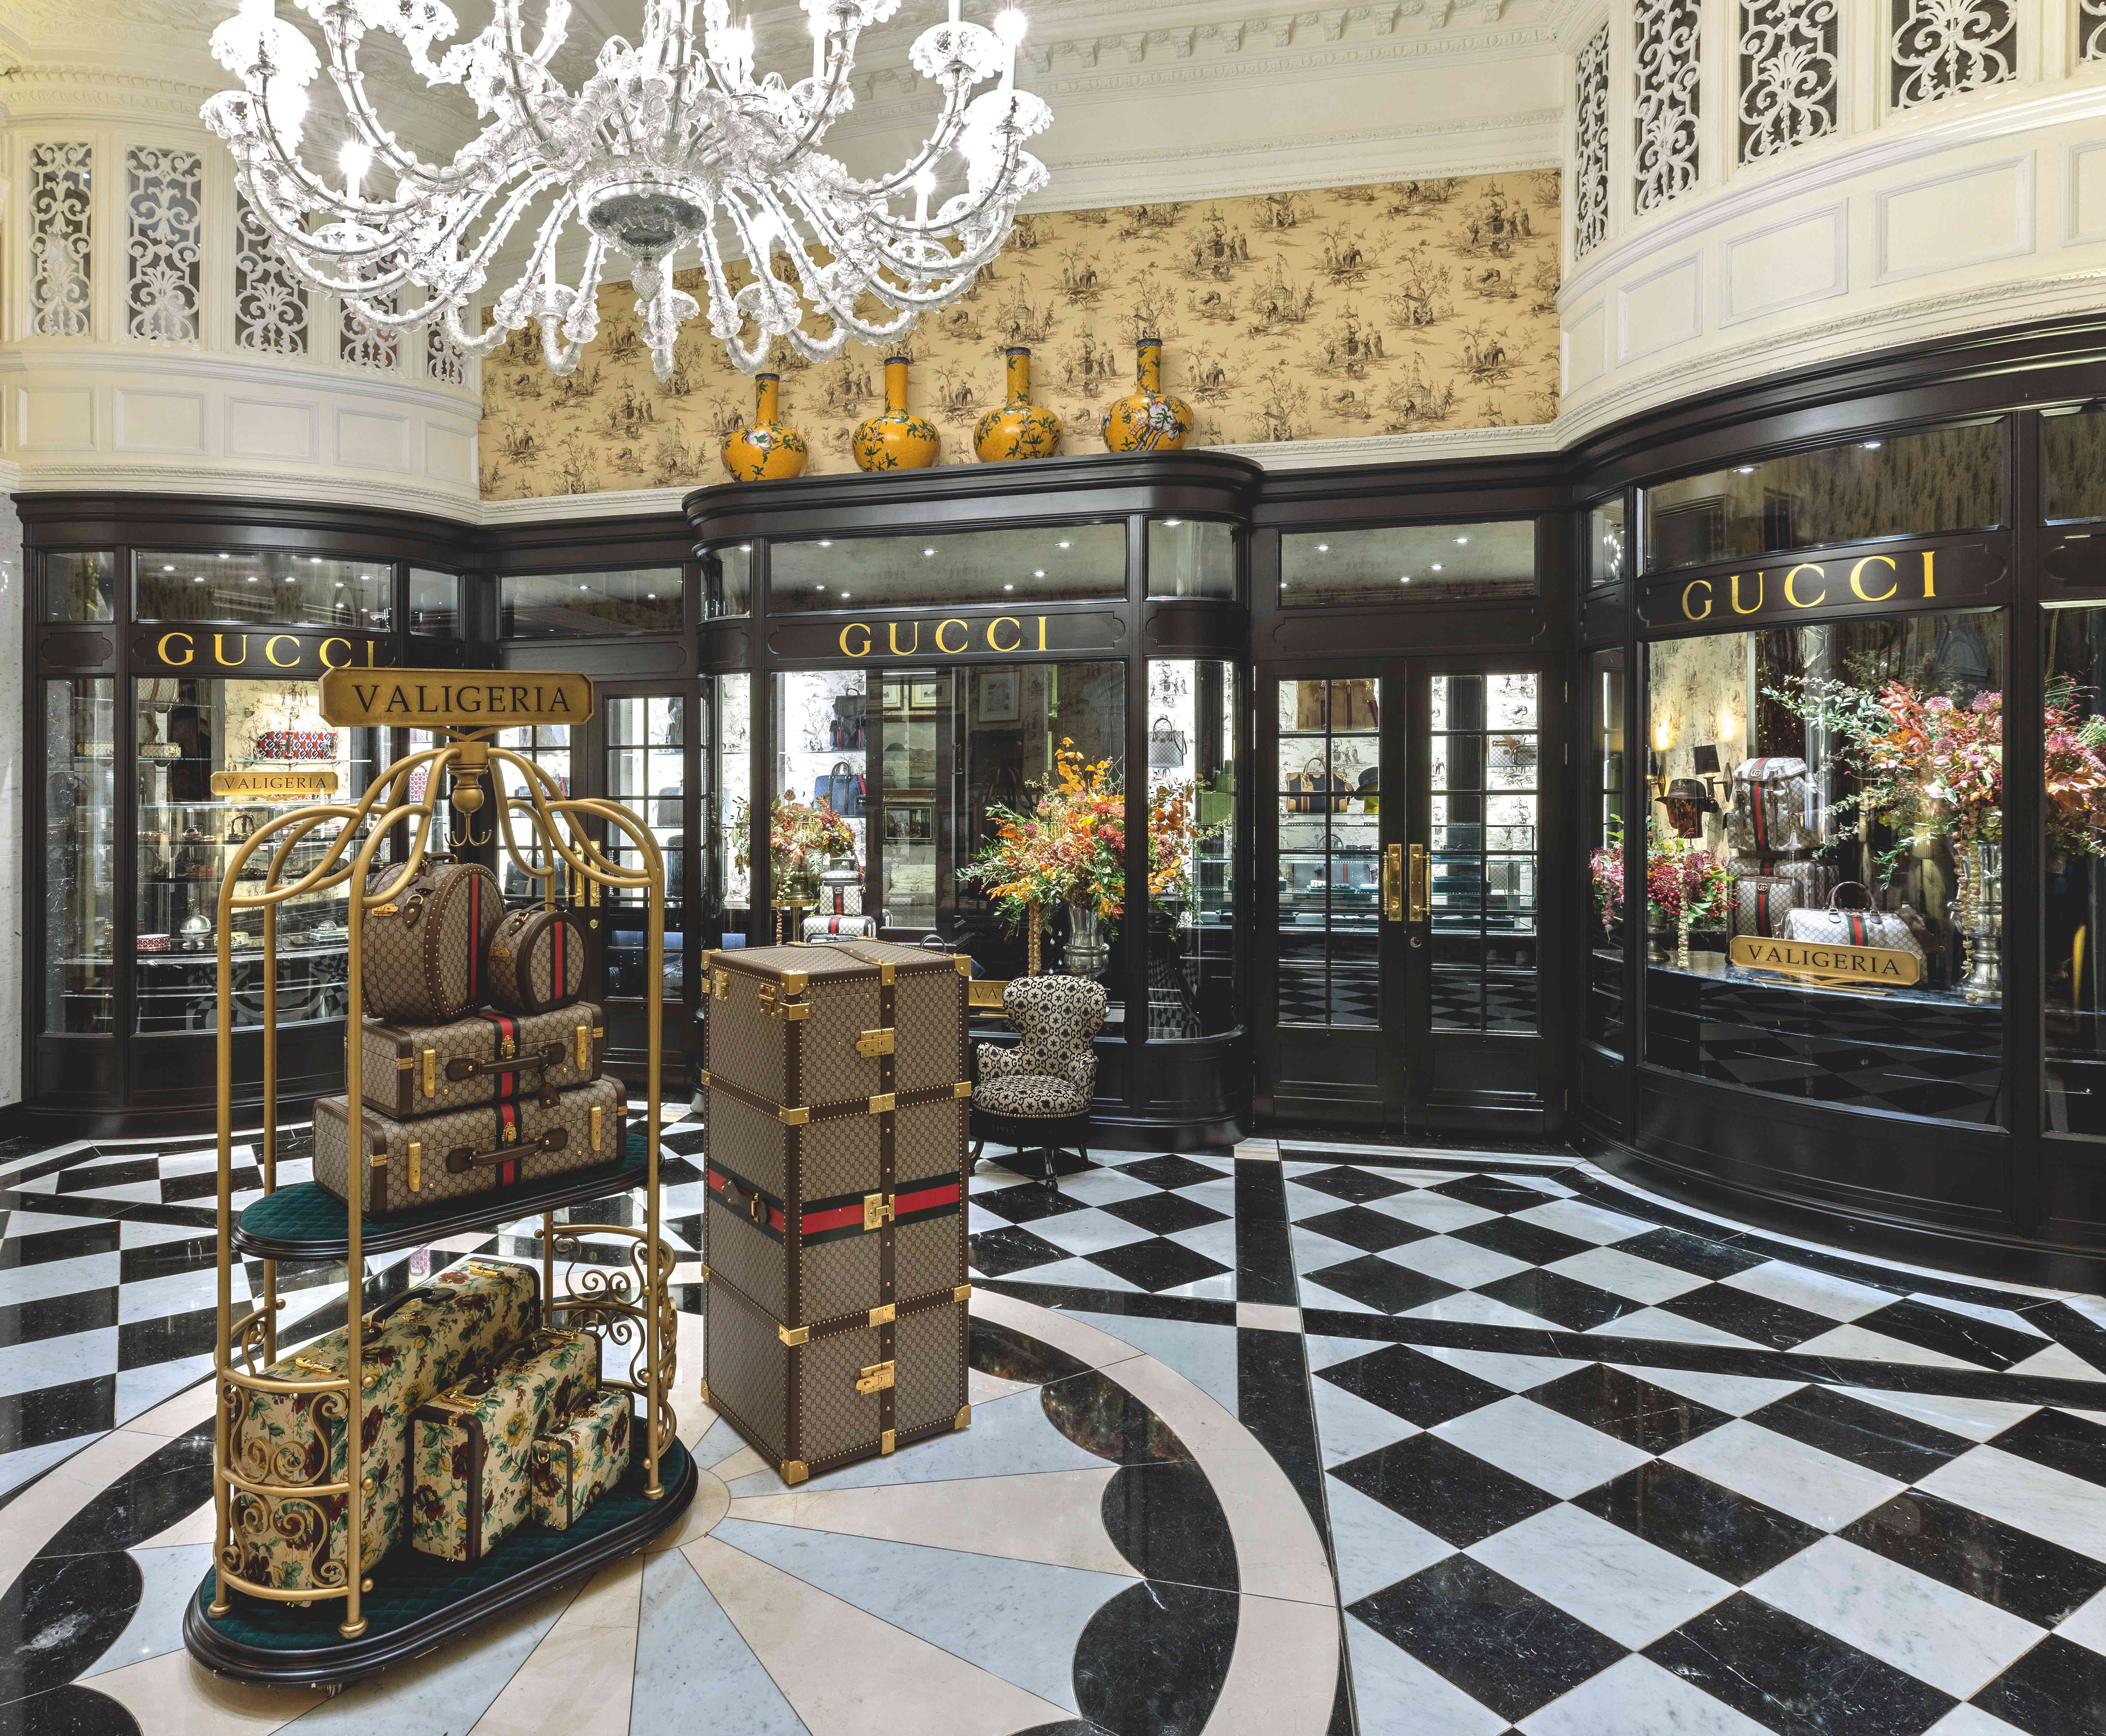 Premisse Zielig Luipaard The Savoy's Gucci pop-up is Christmas shopping perfection